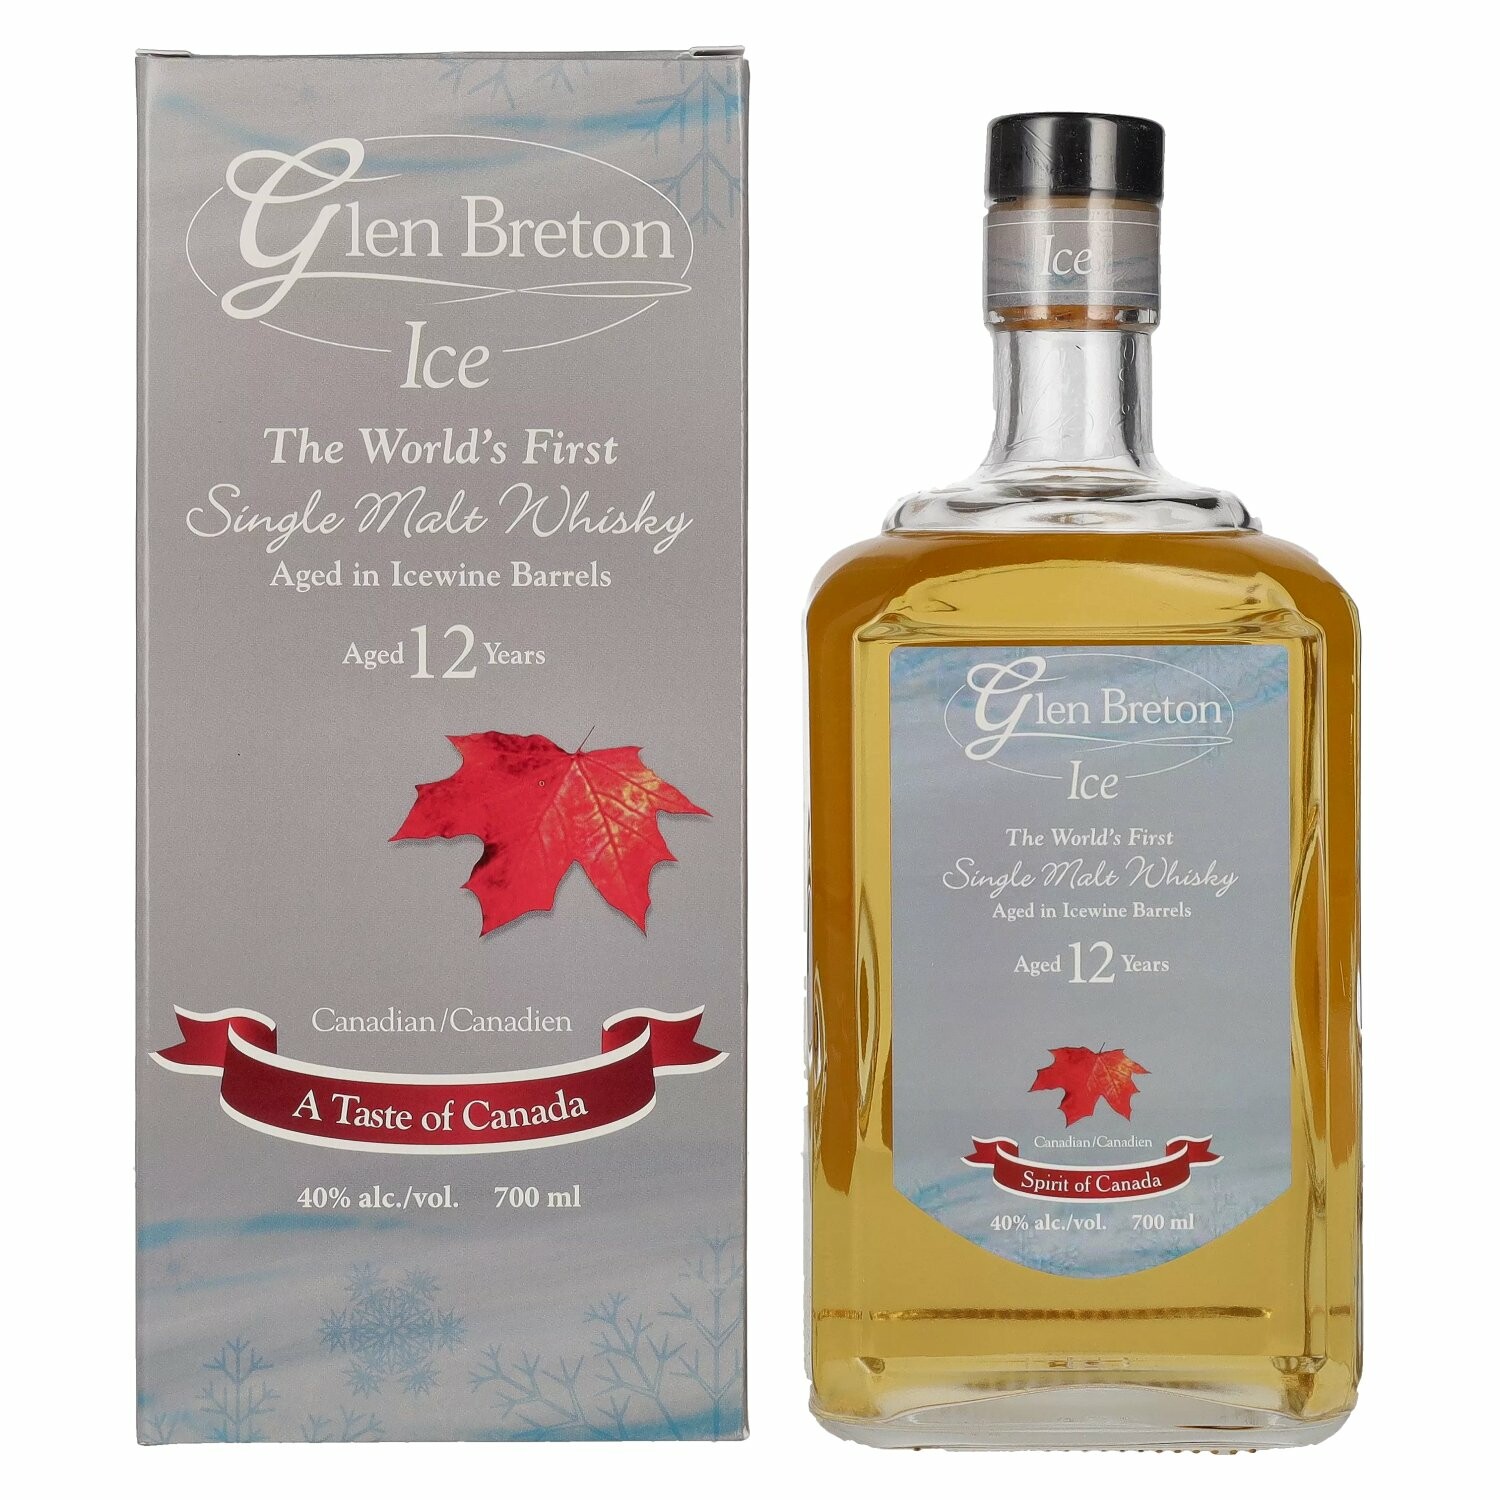 Glen Breton Ice 12 Years Old The World's First Single Malt Whisky Aged in Icewine Barrels 40% Vol. 0,7l in Giftbox